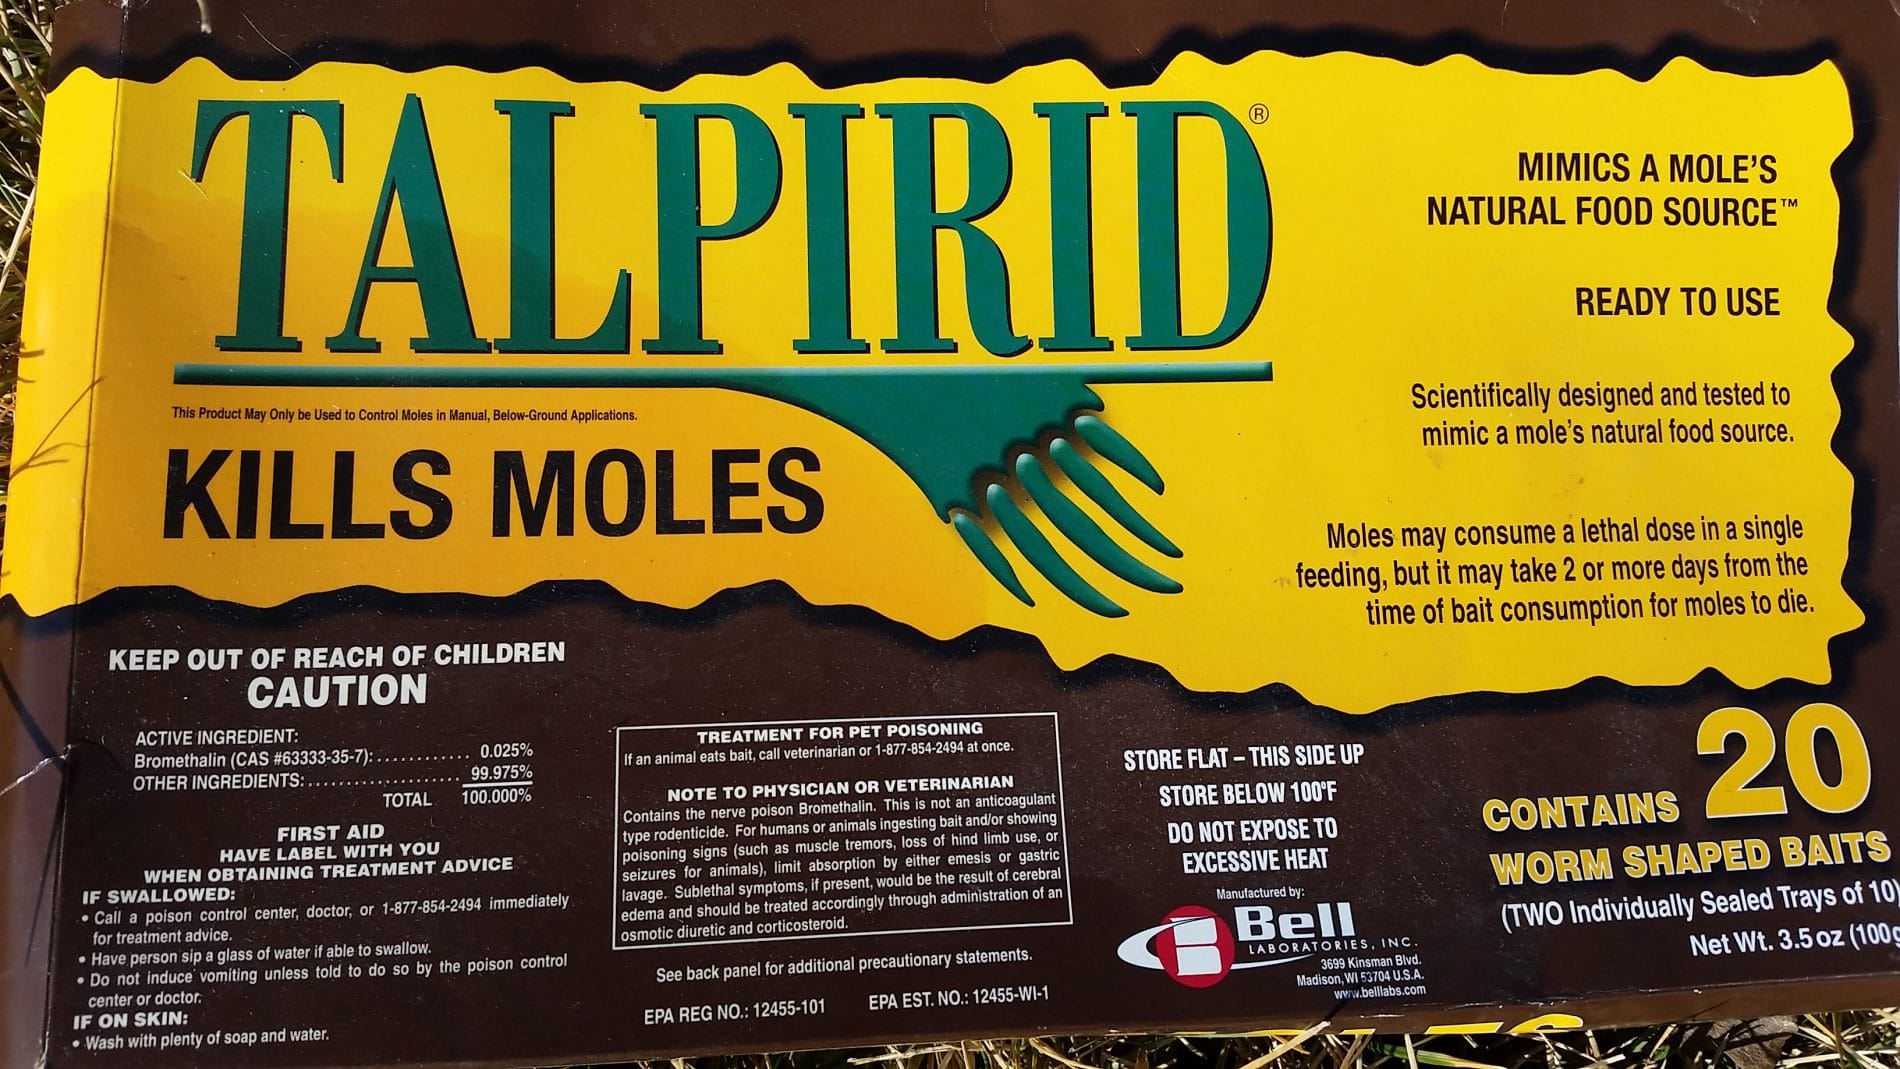 Bait those pesky moles with Talpirid. Good advice from Turf Solutions 12024 S Easley Rd Lees Summit MO 64086